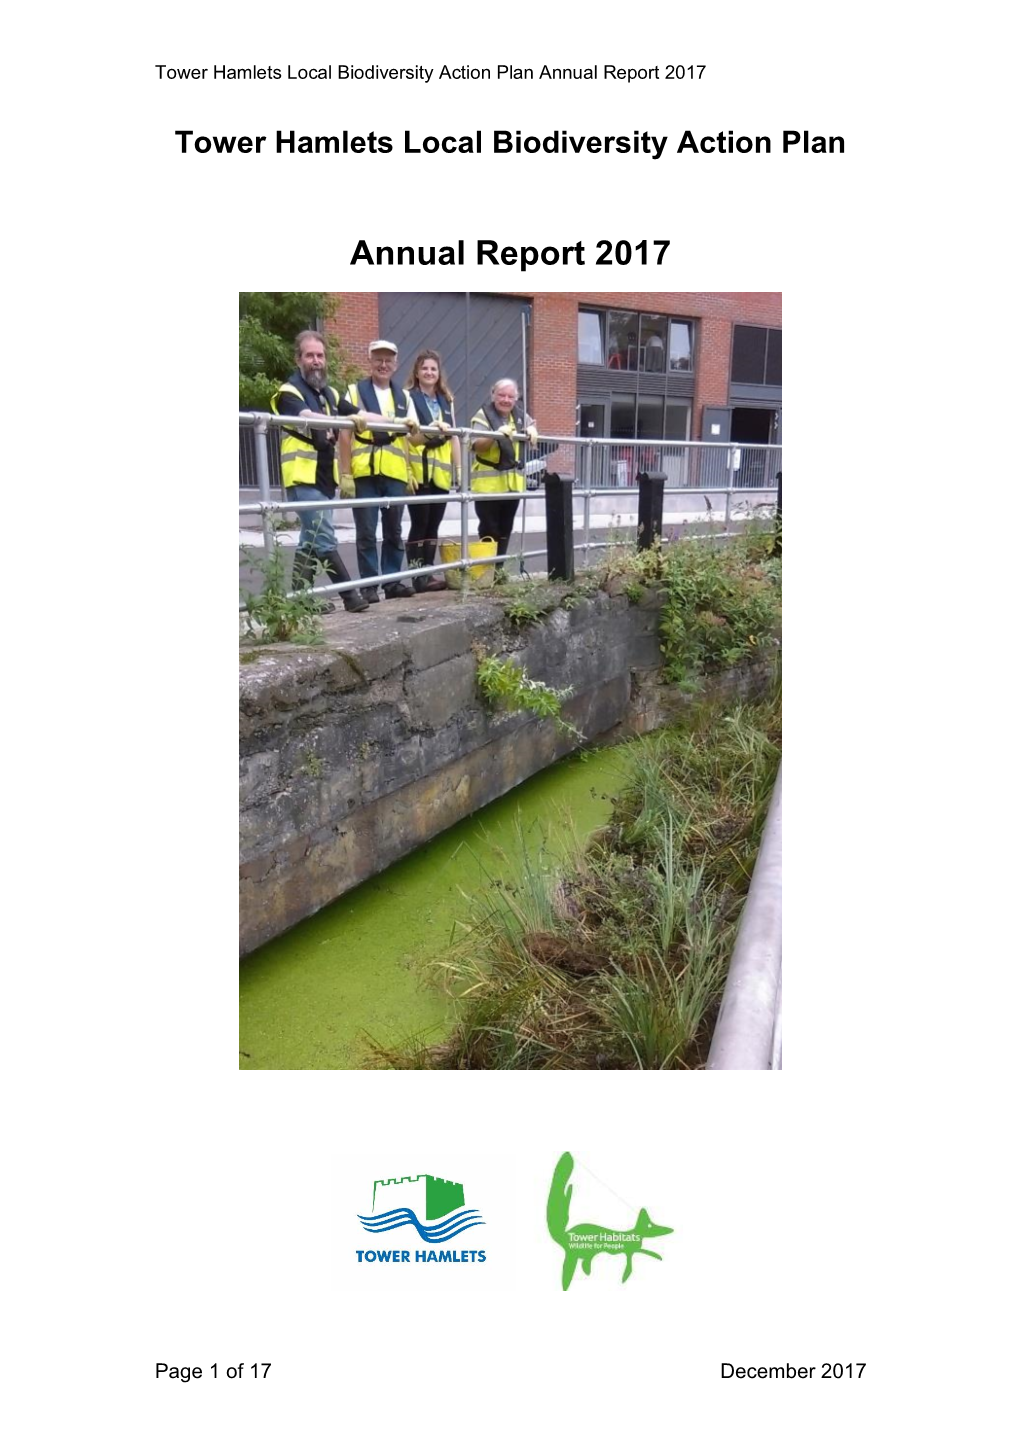 Tower Hamlets LBAP Annual Report 2017